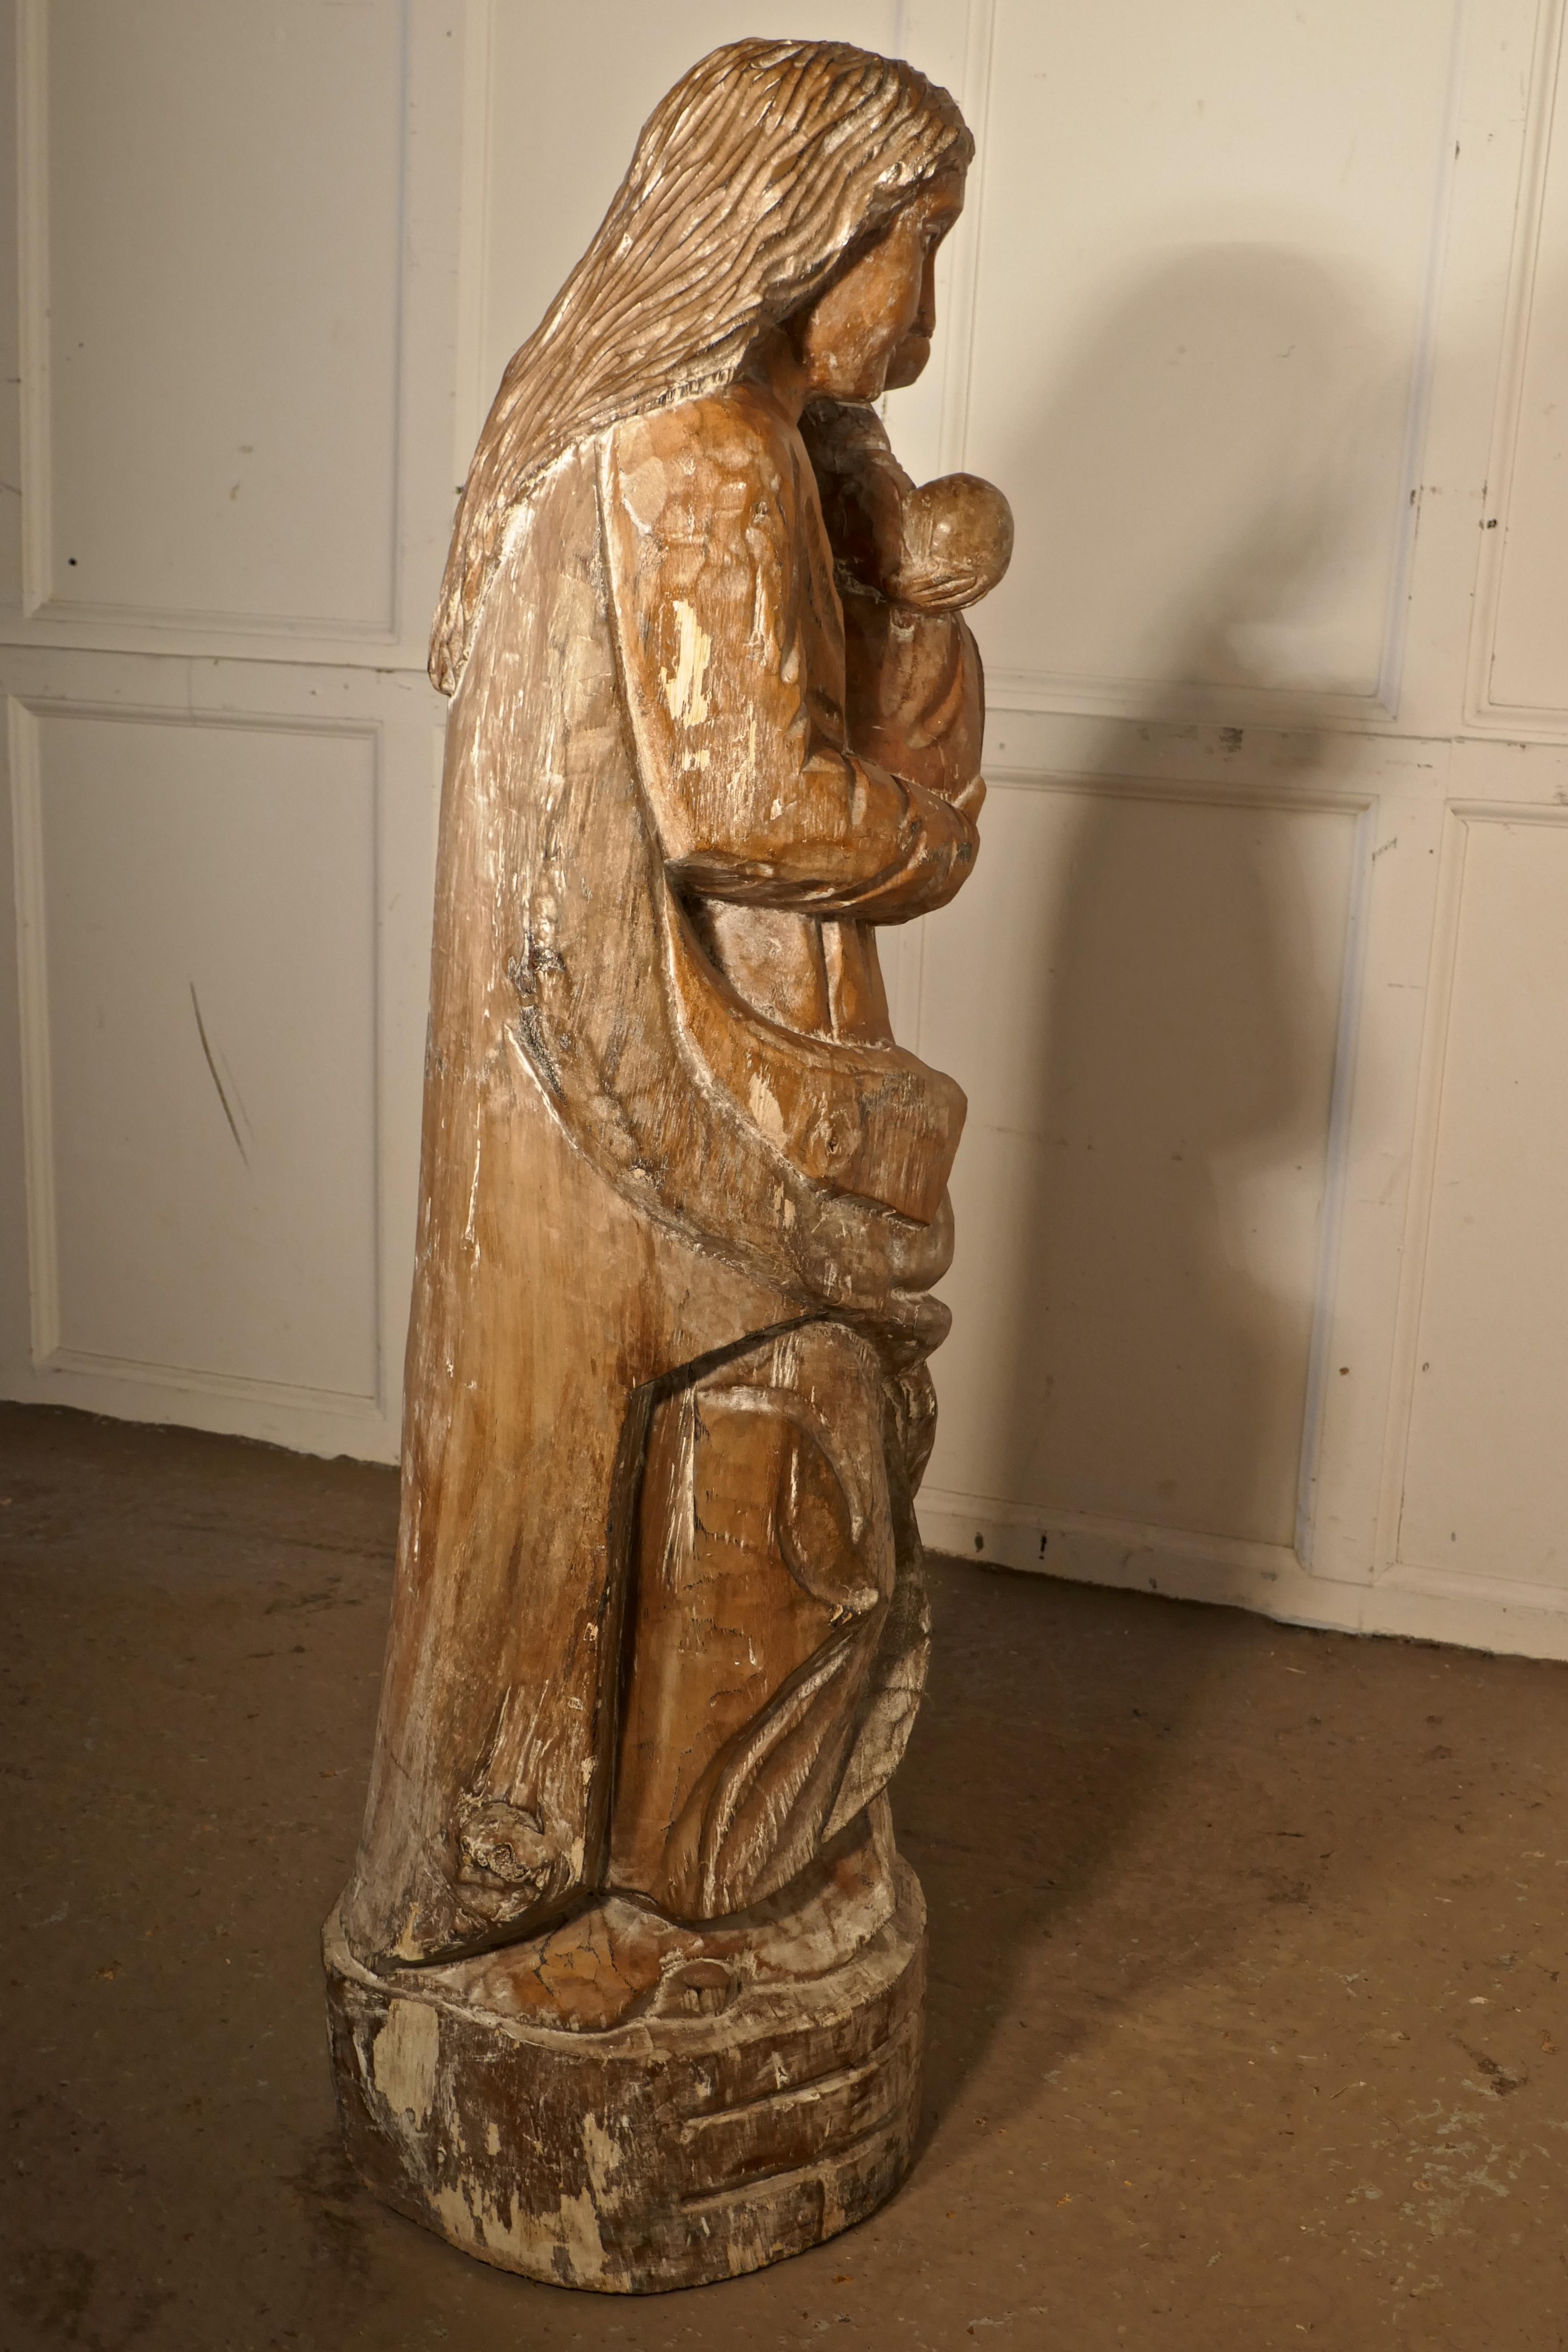 how much is the madonna and child sculpture worth today